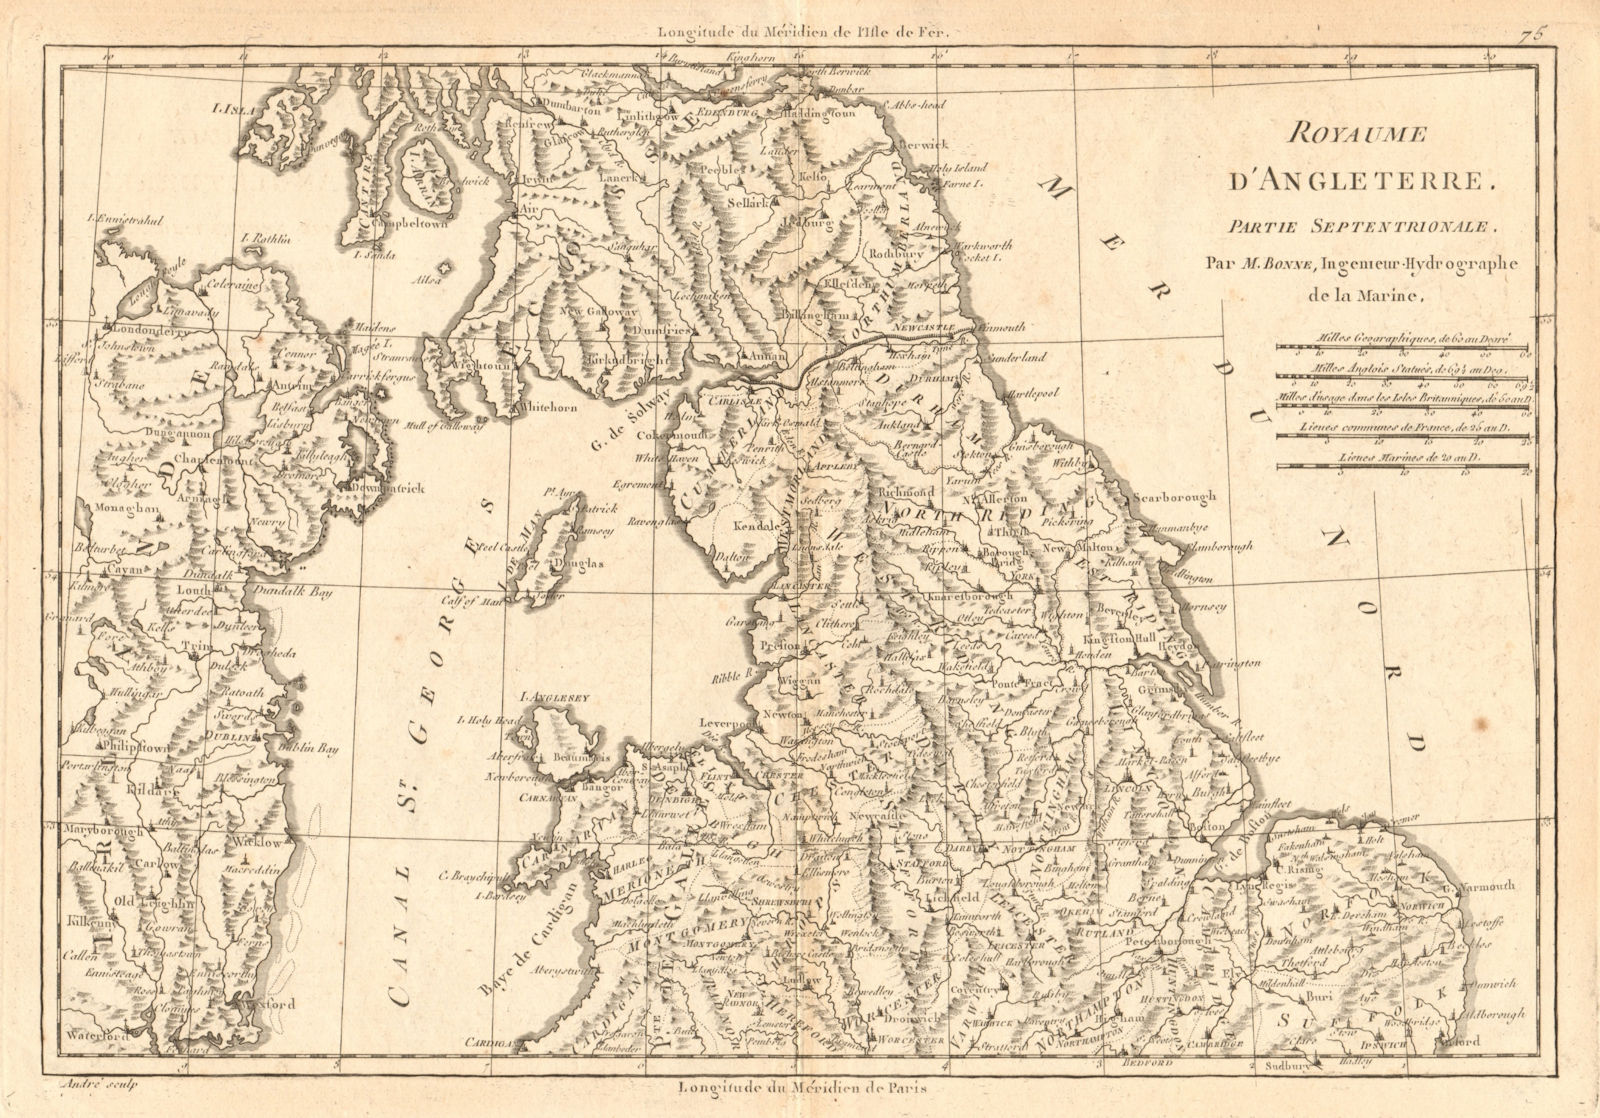 Associate Product Royaume d'Angleterre partie Septentrionale. England & Wales North BONNE 1787 map